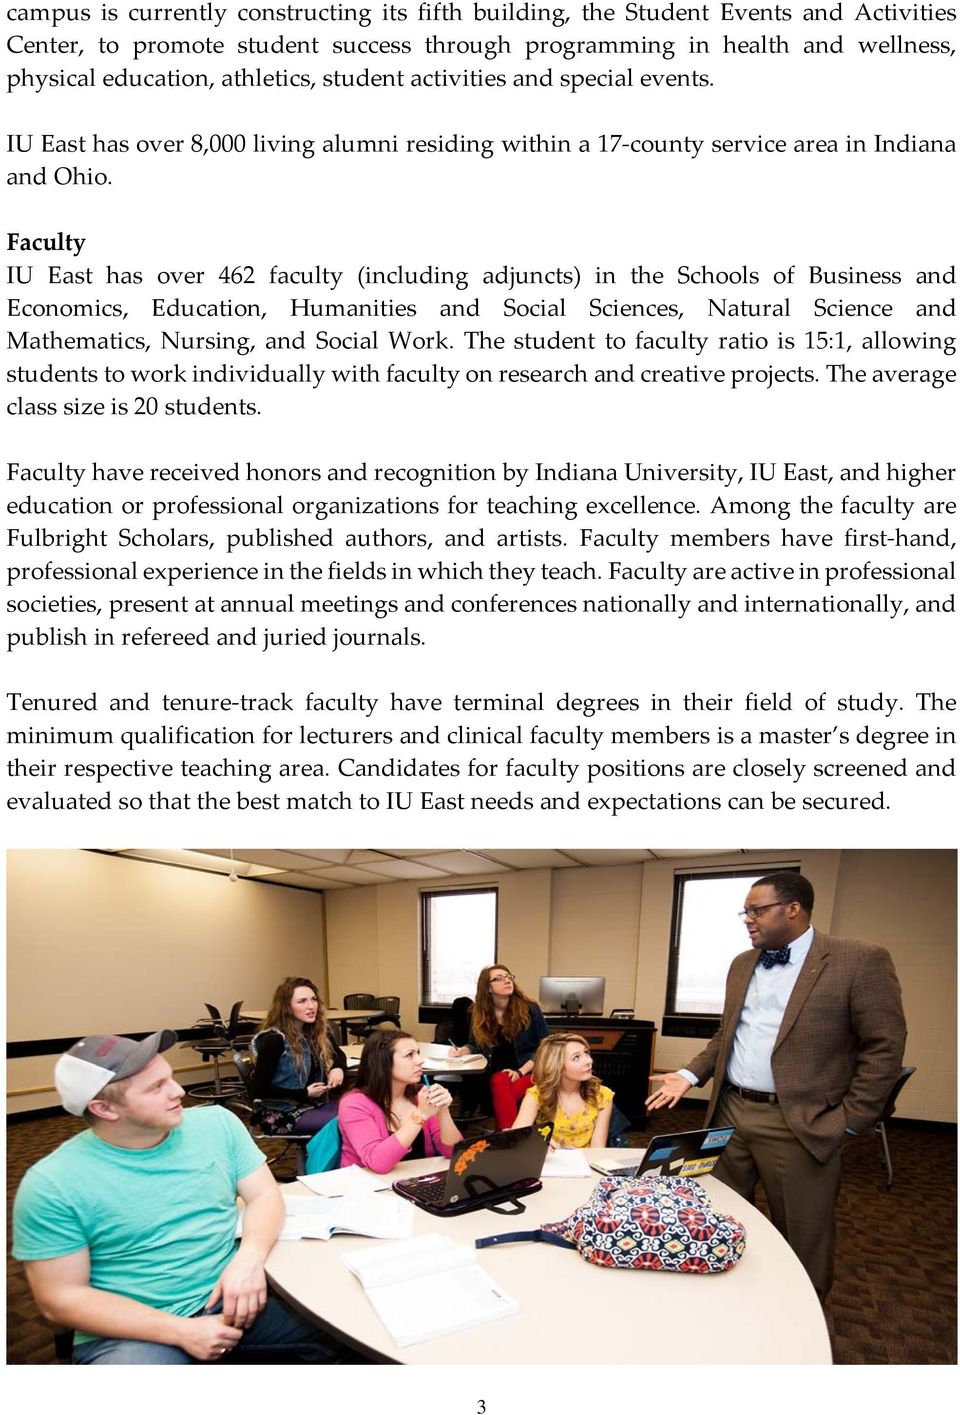 Faculty IU East has over 462 faculty (including adjuncts) in the Schools of Business and Economics, Education, Humanities and Social Sciences, Natural Science and Mathematics, Nursing, and Social